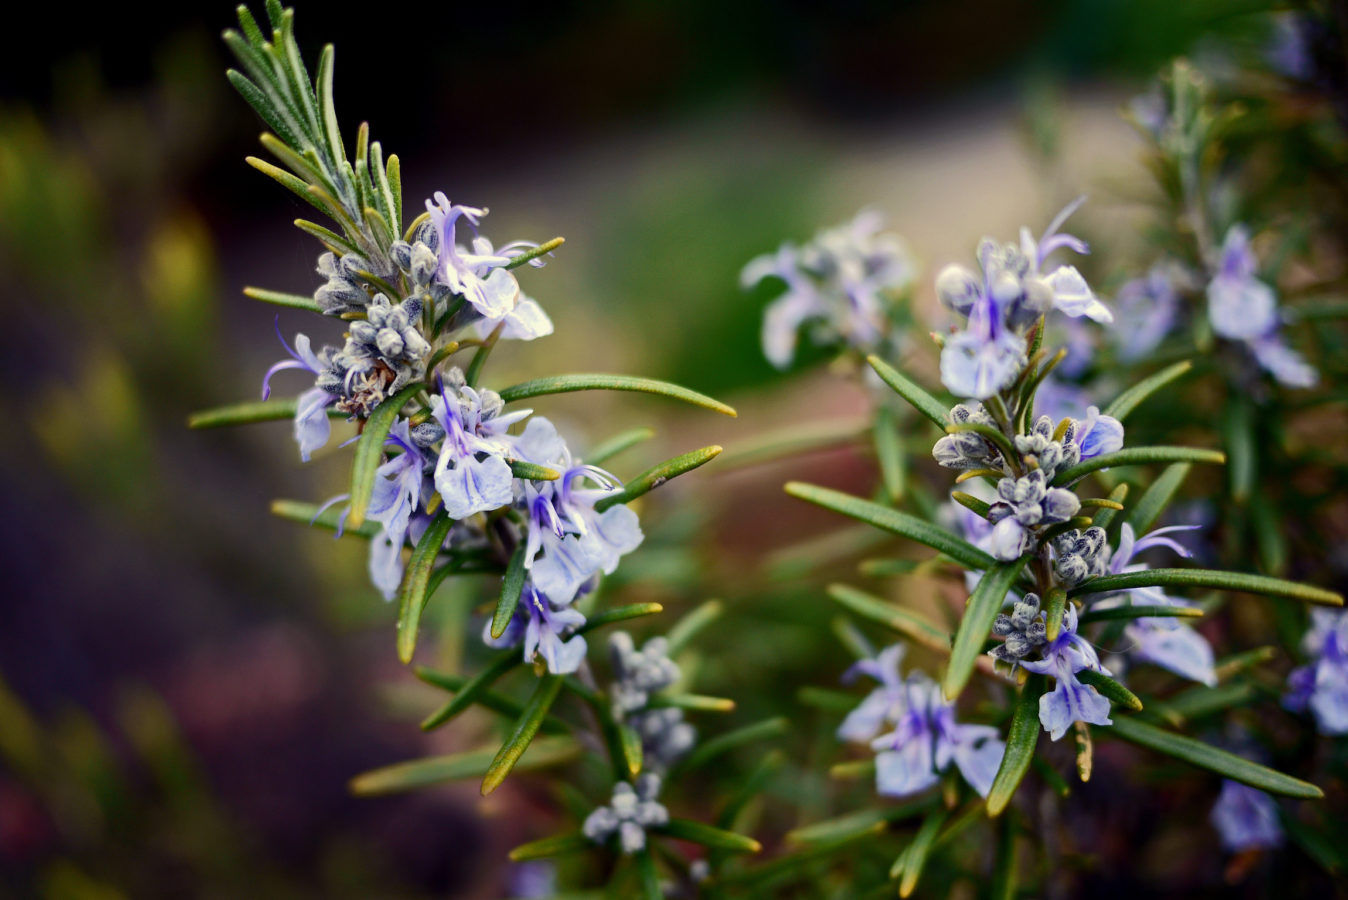 Rosemary oil is the latest hair care ingredient that’s viral on TikTok